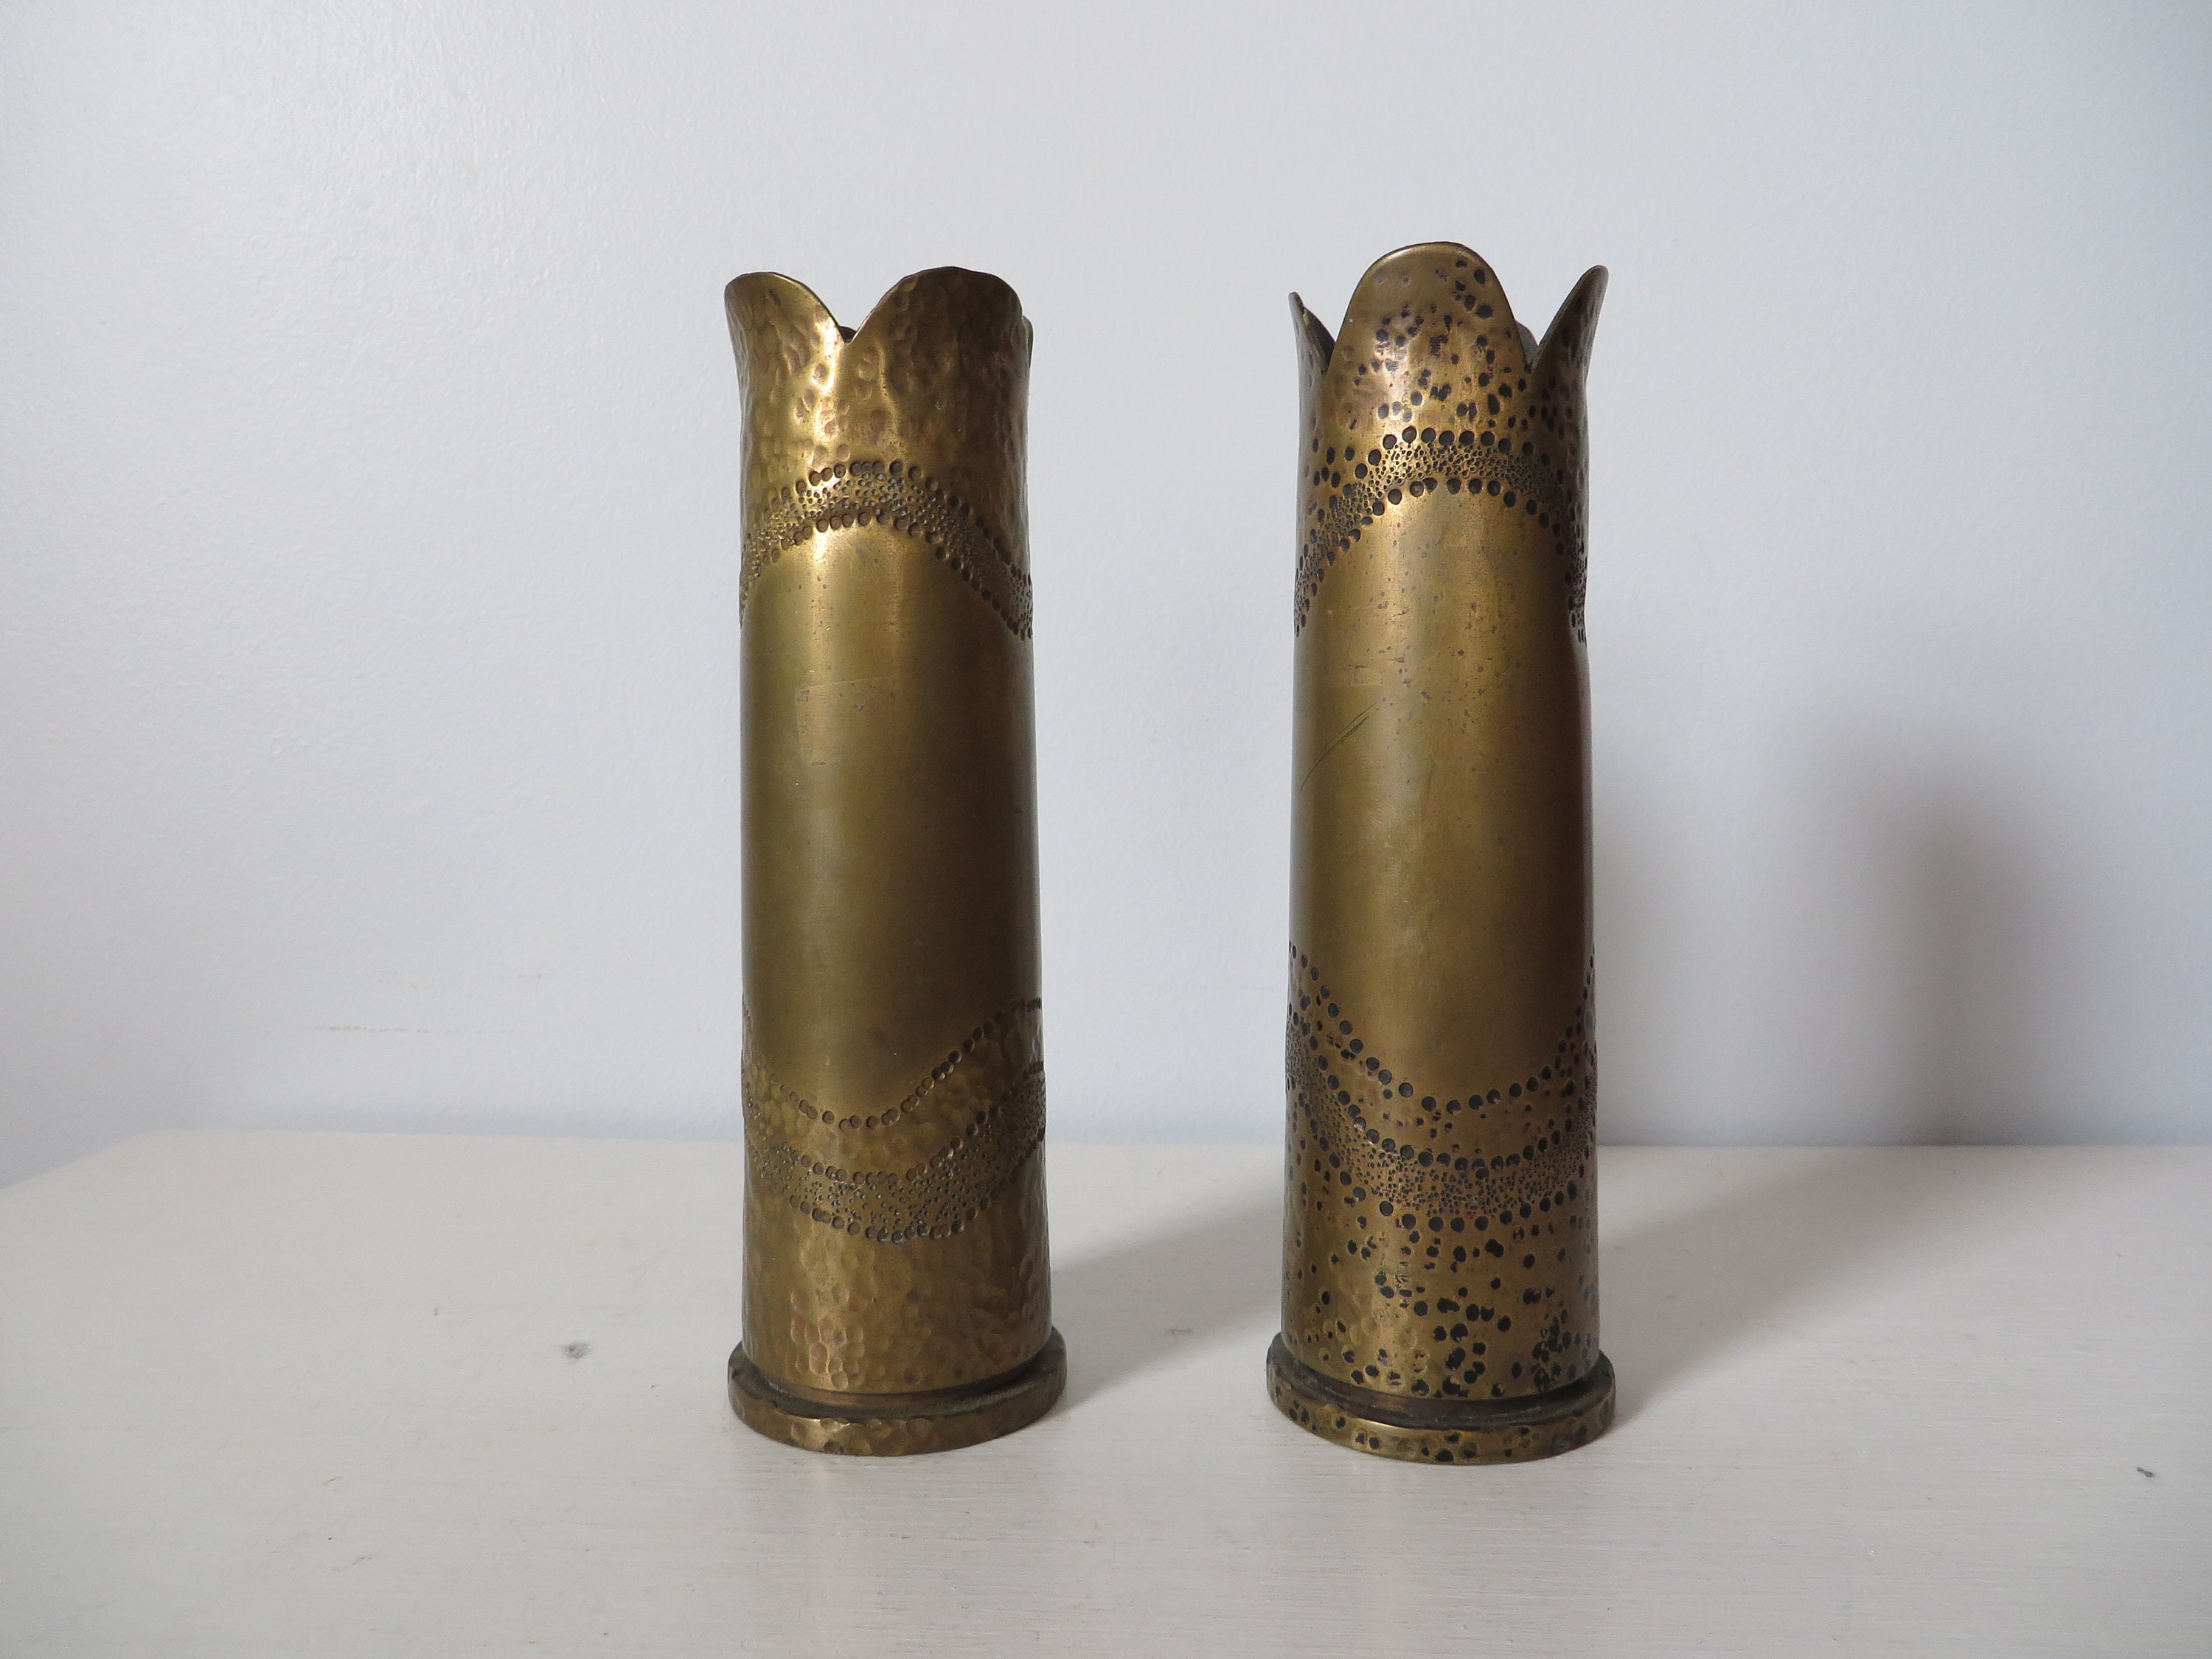 Vintage Trench Art Artillery Shell Vases World War Two 